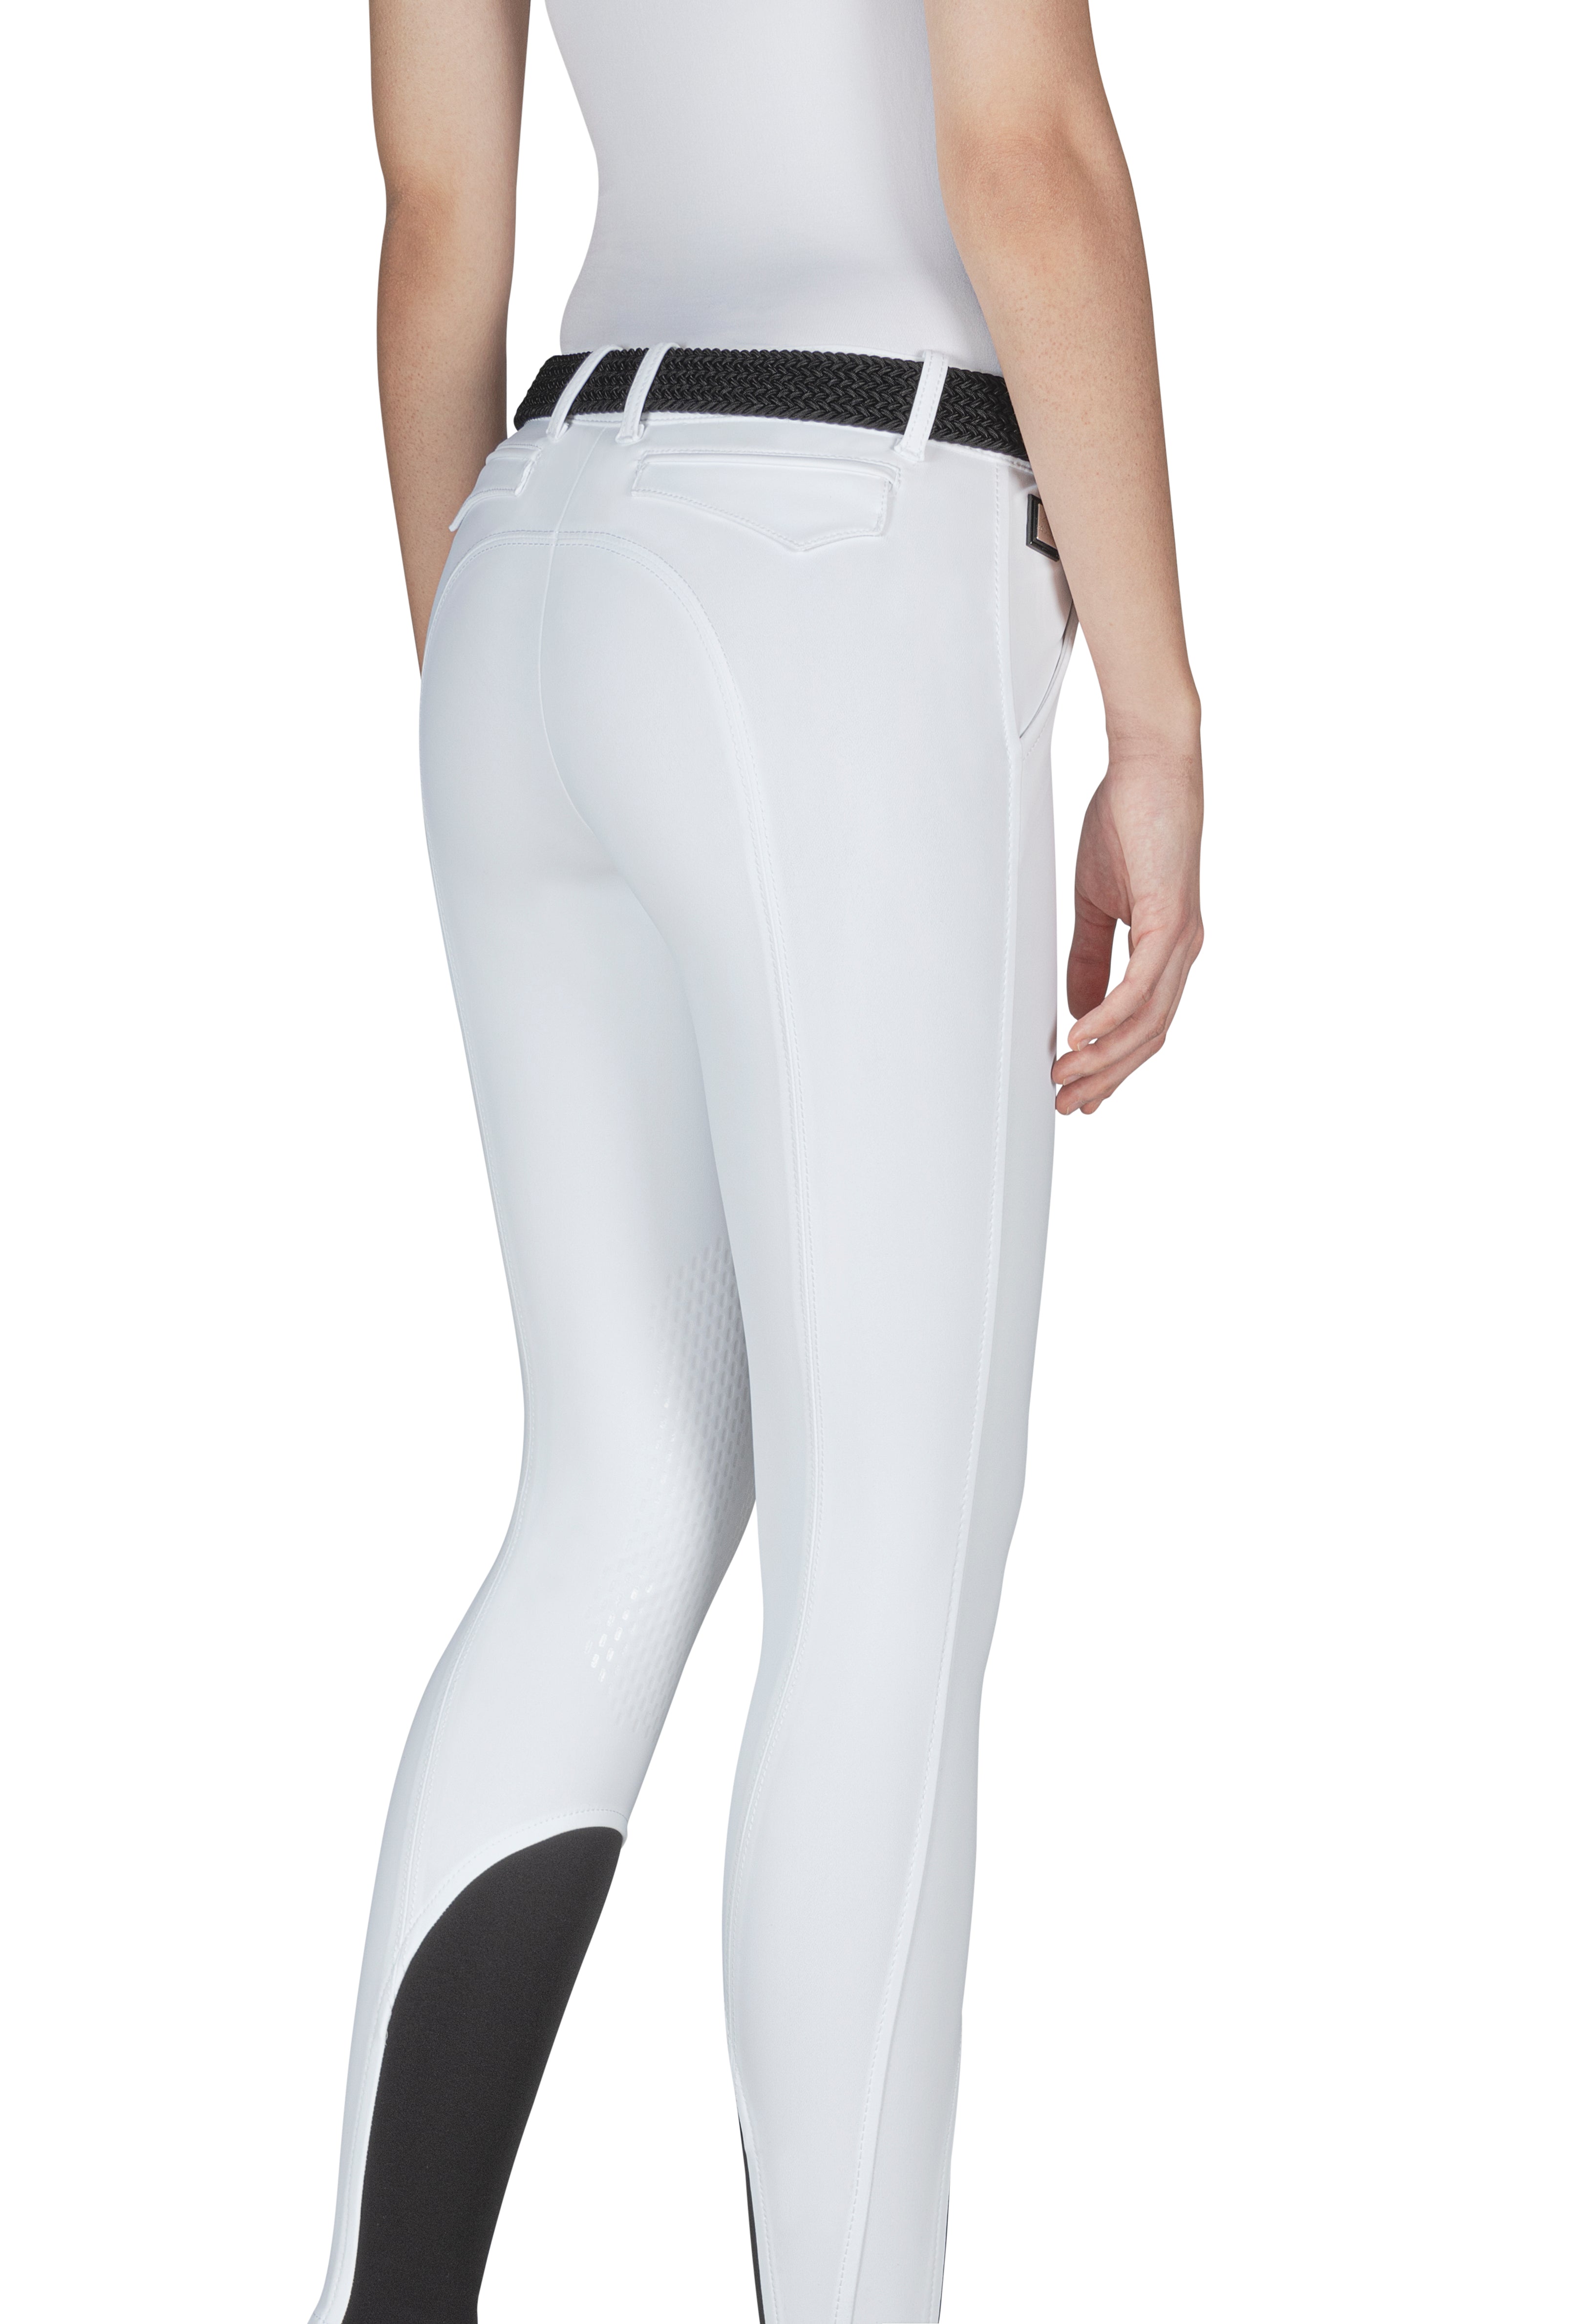 The Equiline Brendak is a great new addition to the Range. The breech is made from b-move fabric, has the x grip knees and with its ergonomic  tailoring  proves maximum comfort and freedom of movement.   If your size is not in stock we can happily order it in for you depending on stock availability. Delivery normally takes 10-14 days..   Machine washable